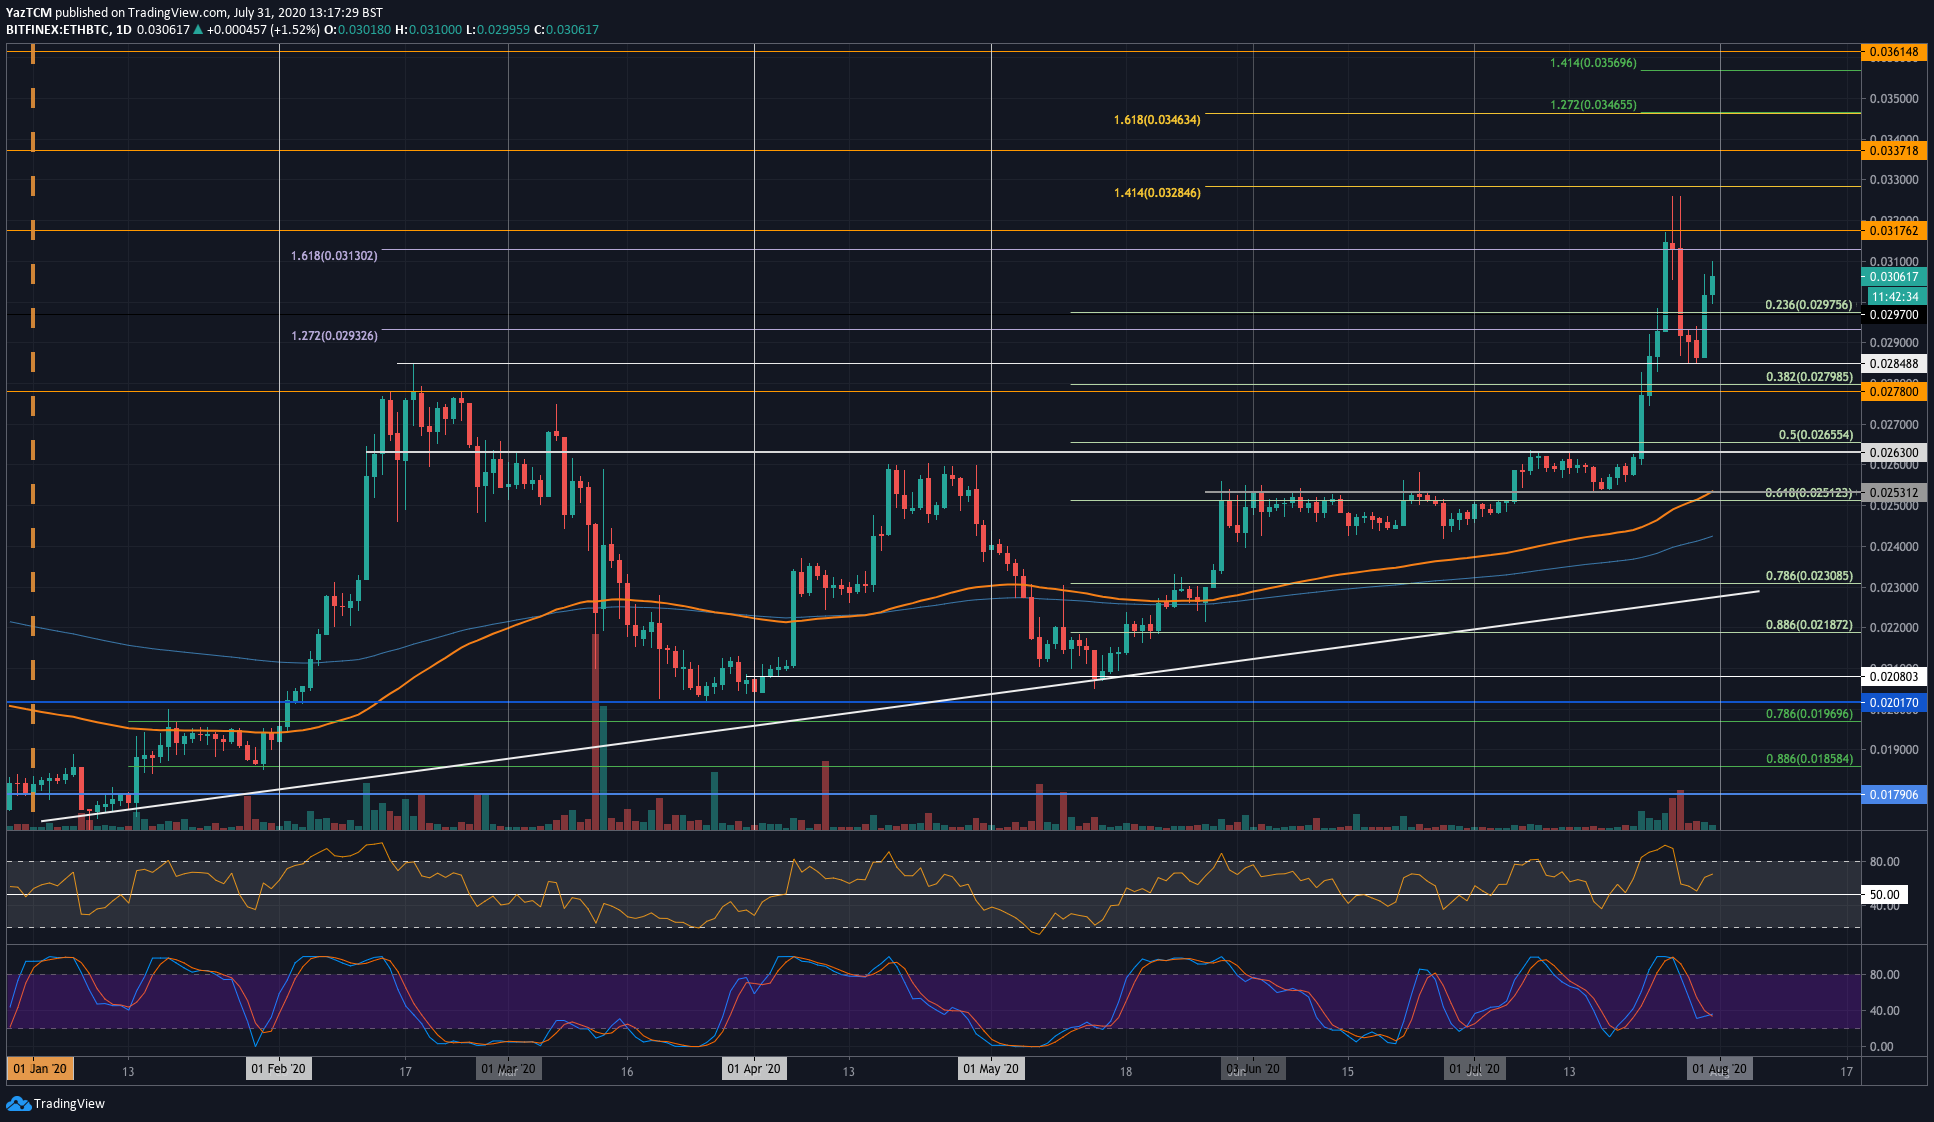 Crypto Price Analysis & Overview July 31st: Bitcoin, Ethereum, Ripple, Chainlink & VeChain